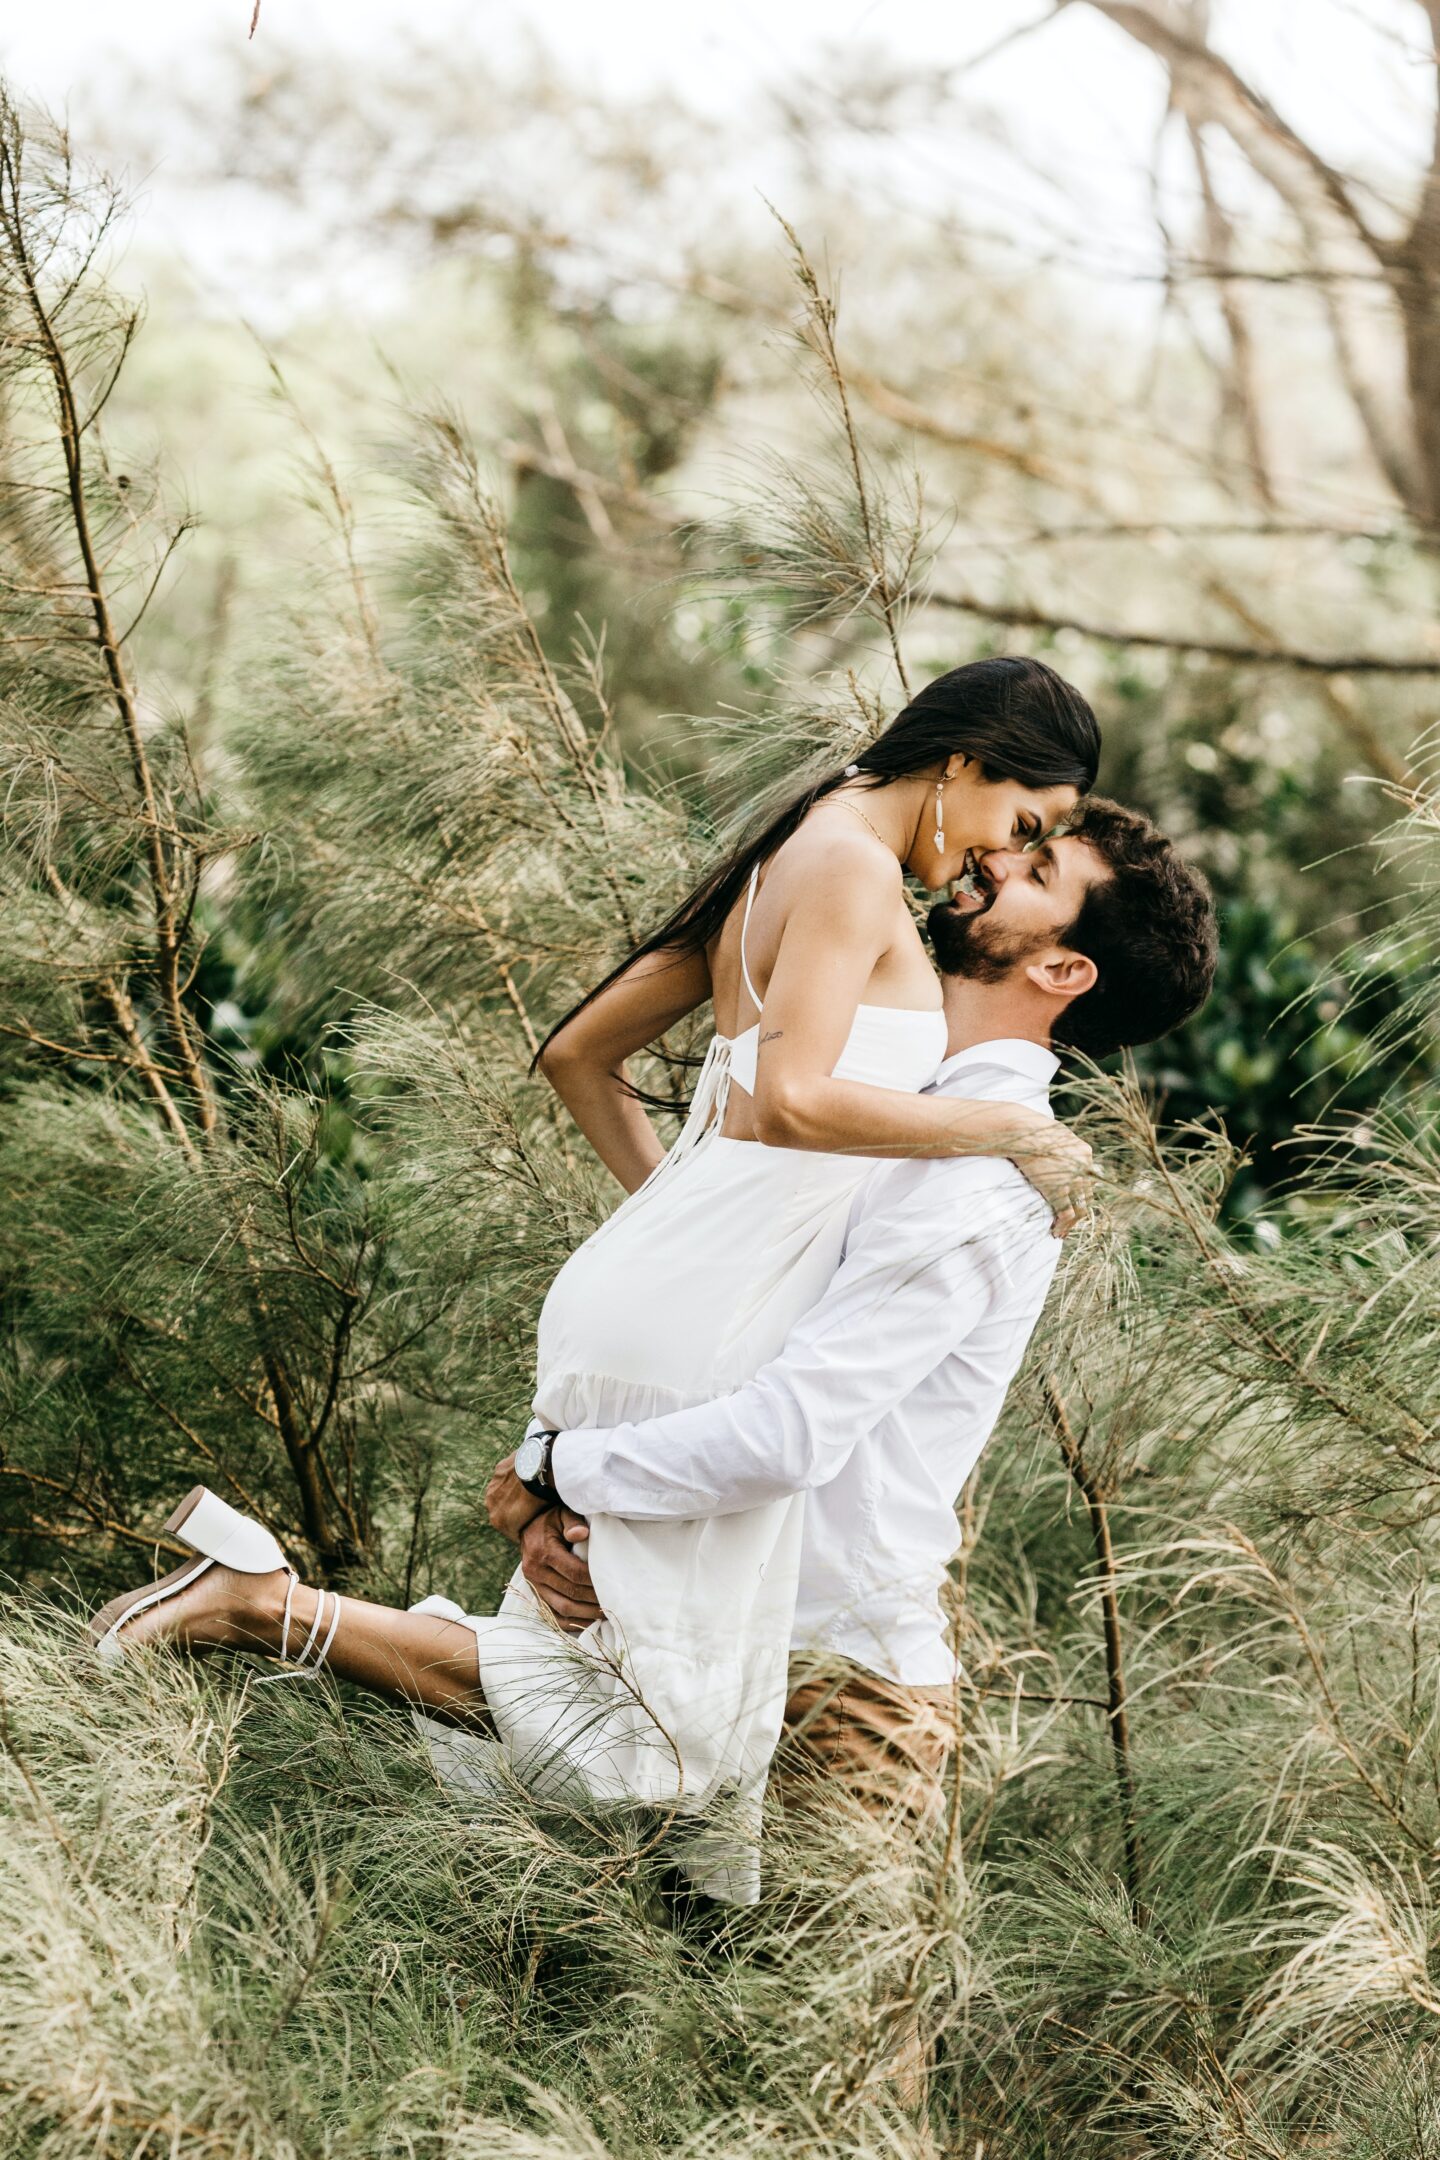 Spring Engagement Photoshoot: Eight Tips And Outfit Ideas For Couples